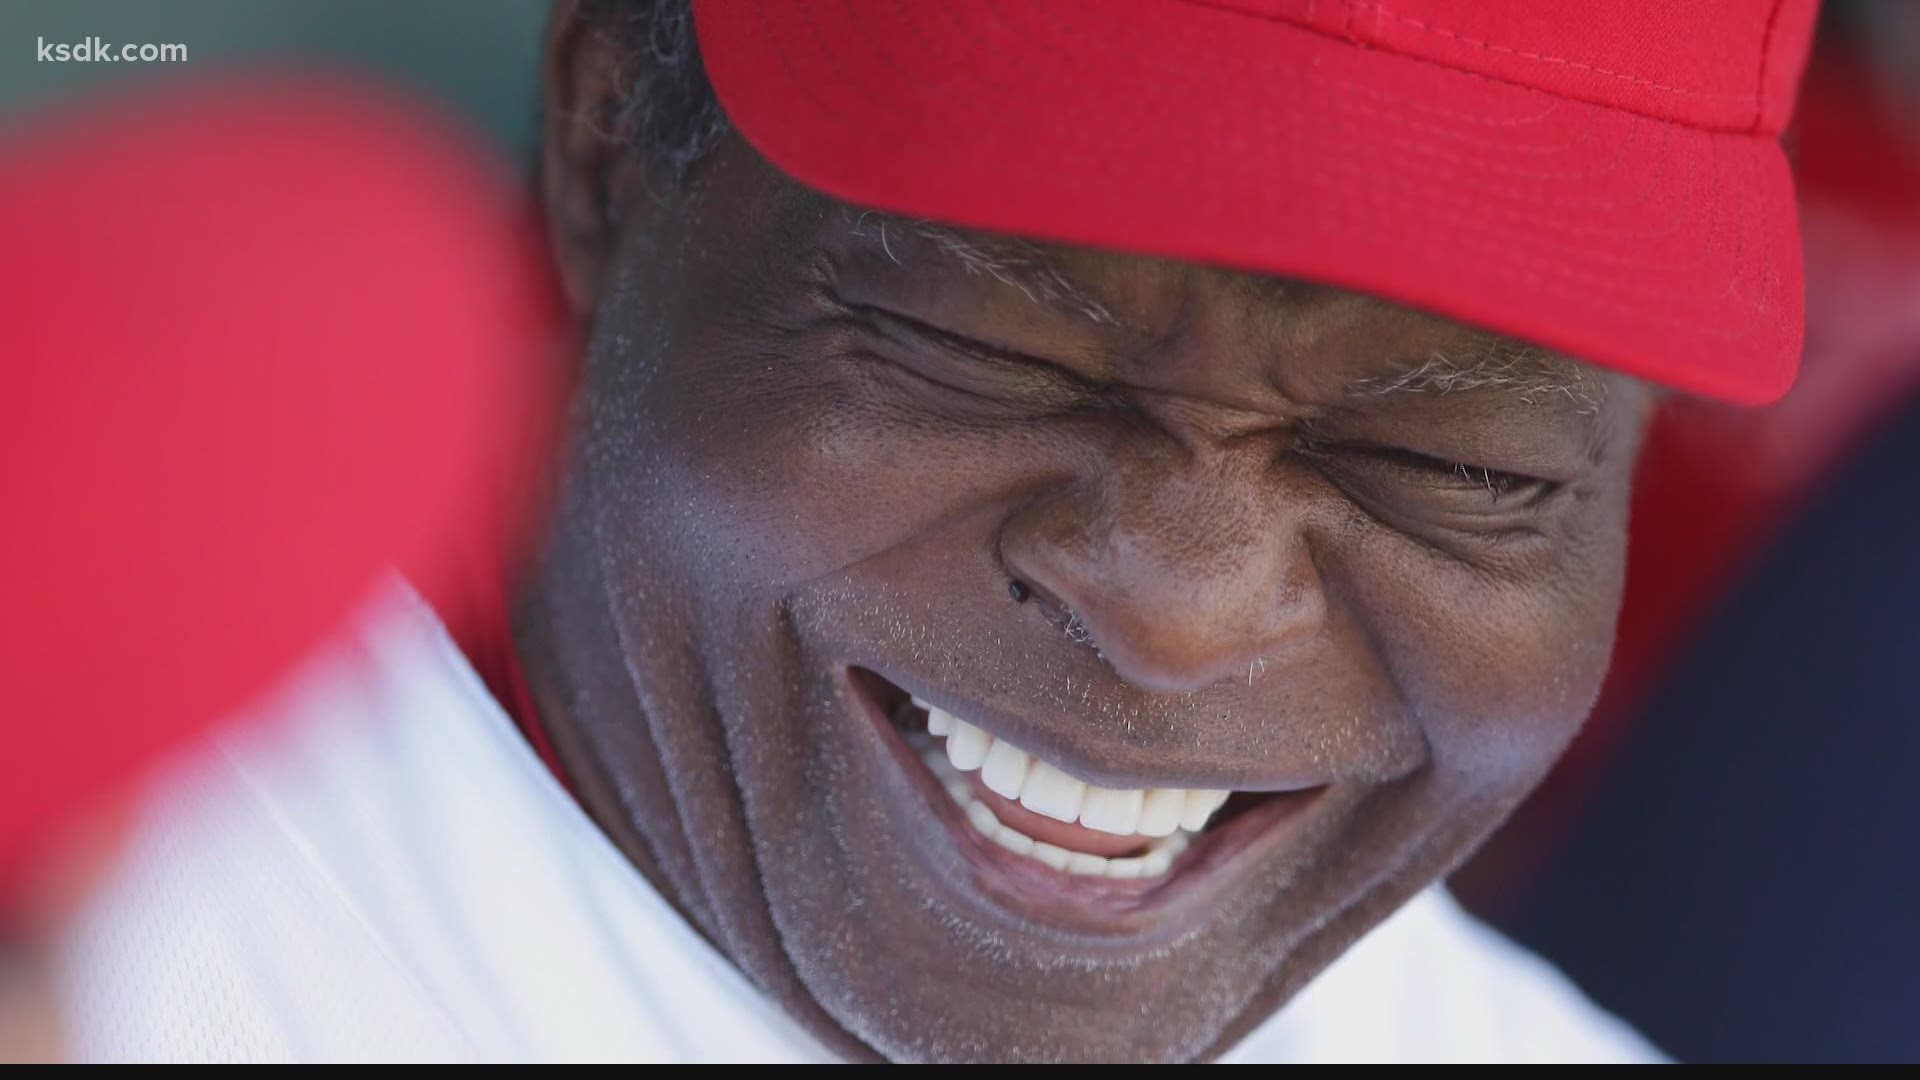 The Hall of Famer played 16 seasons with the Cardinals and helped the team win the World Series twice in the 1960s.